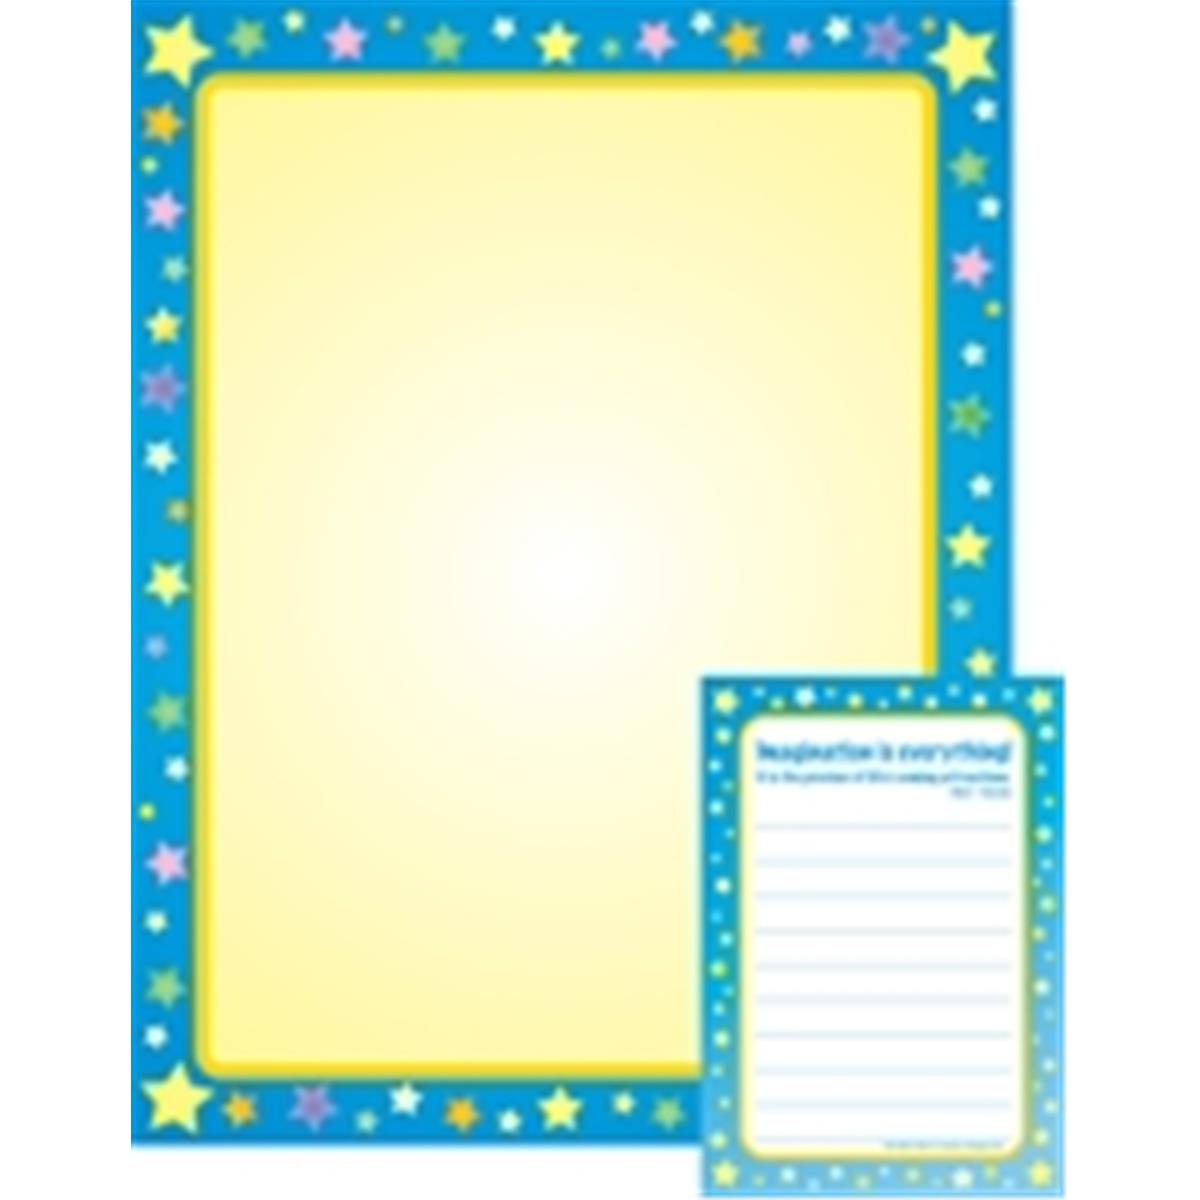 Se-6027 3.5 X 5 In. Notes & Quotes Writing Set, Imagination - 65 Sheets Per Pack